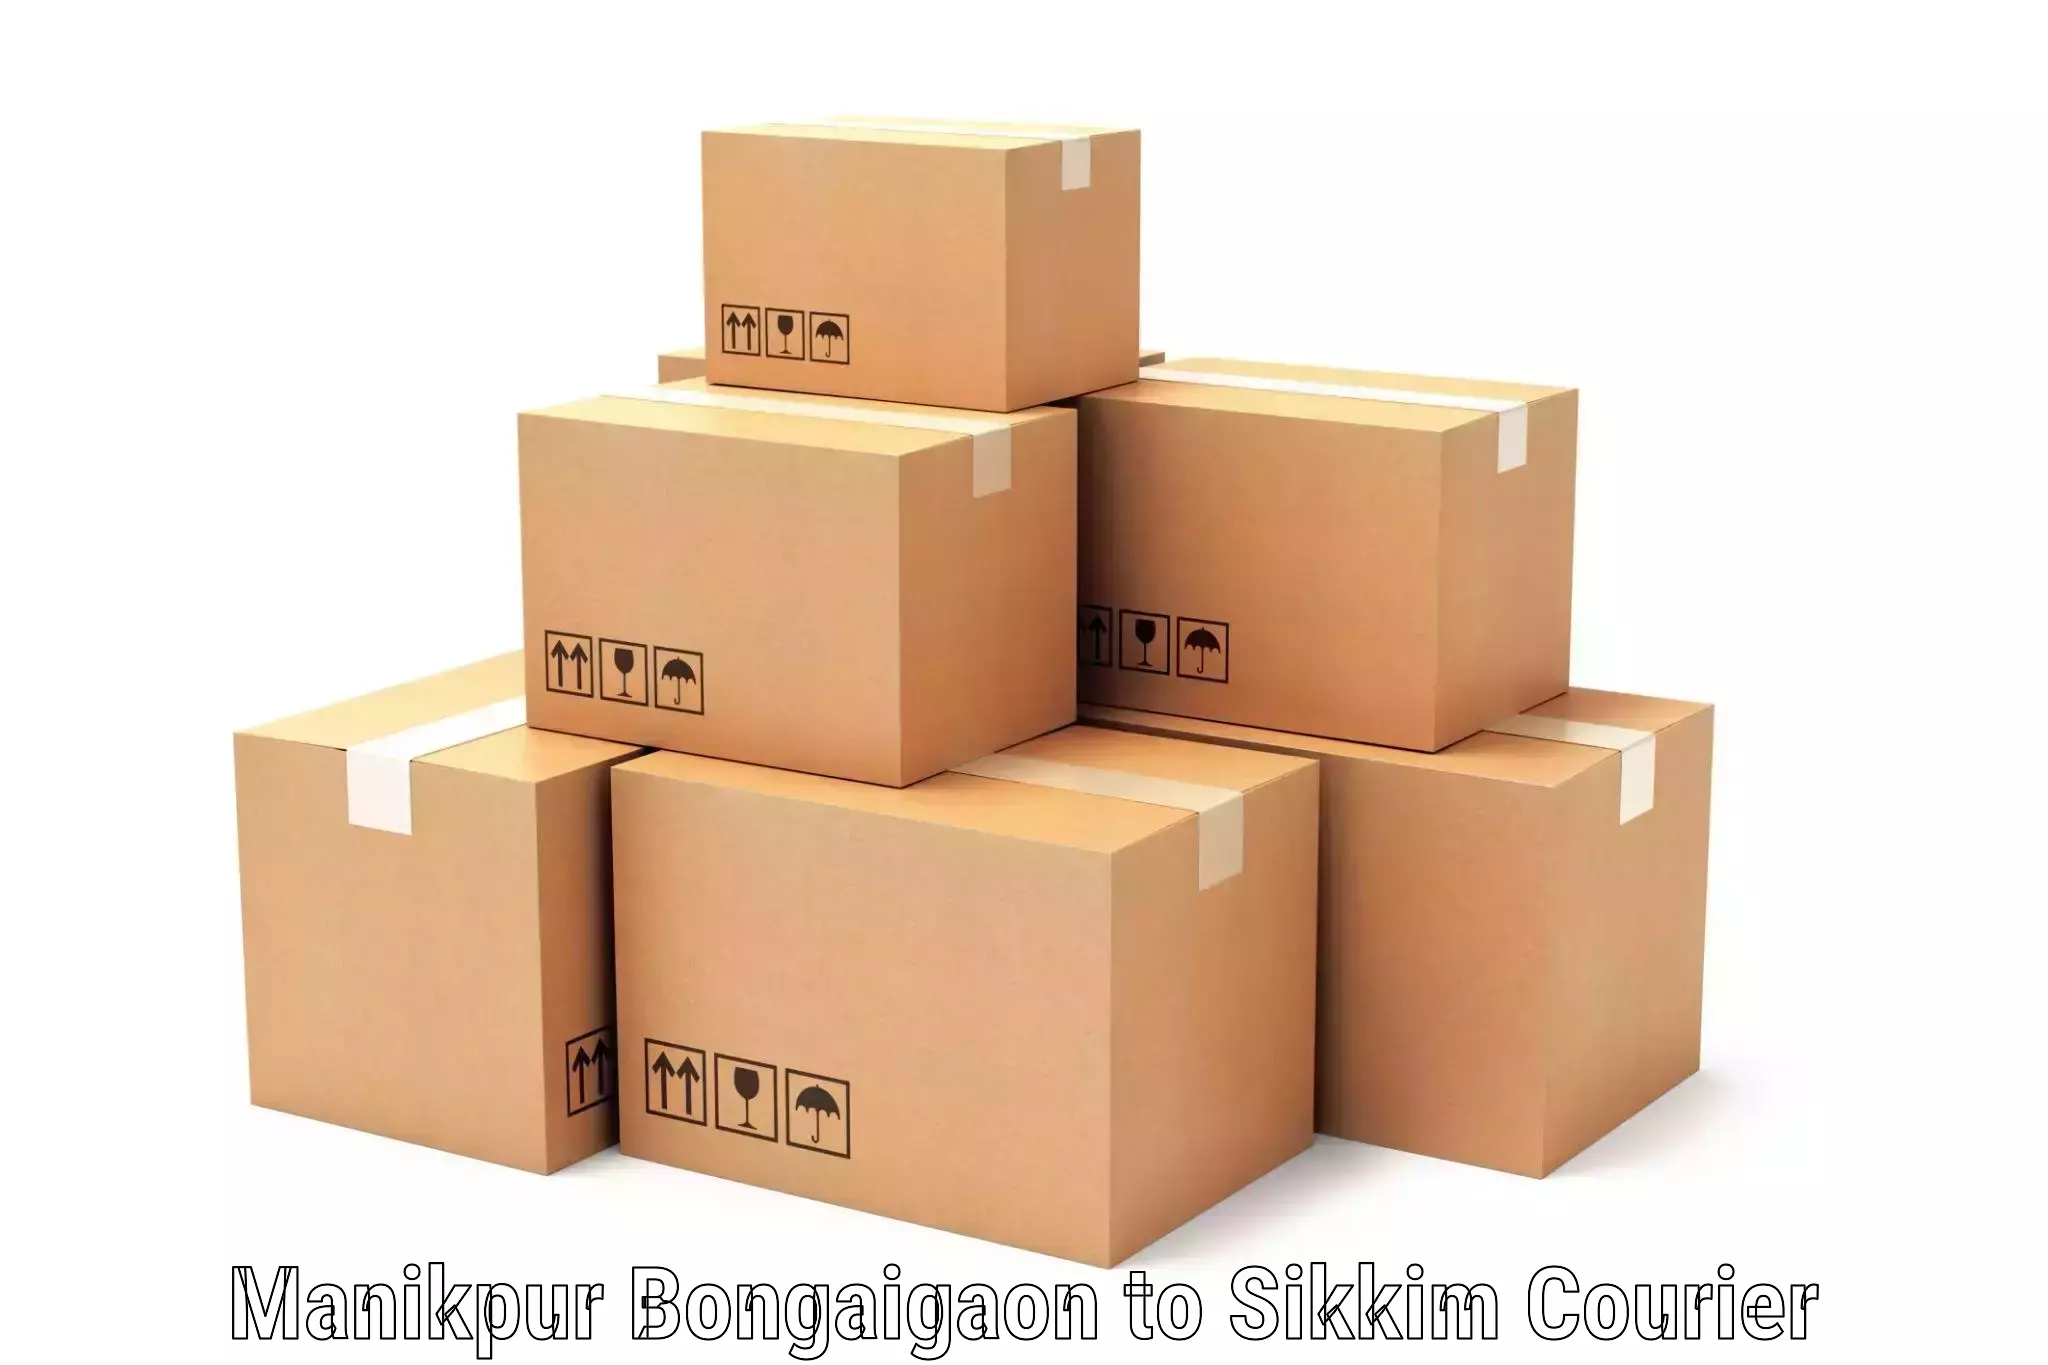 Easy access courier services Manikpur Bongaigaon to Pelling